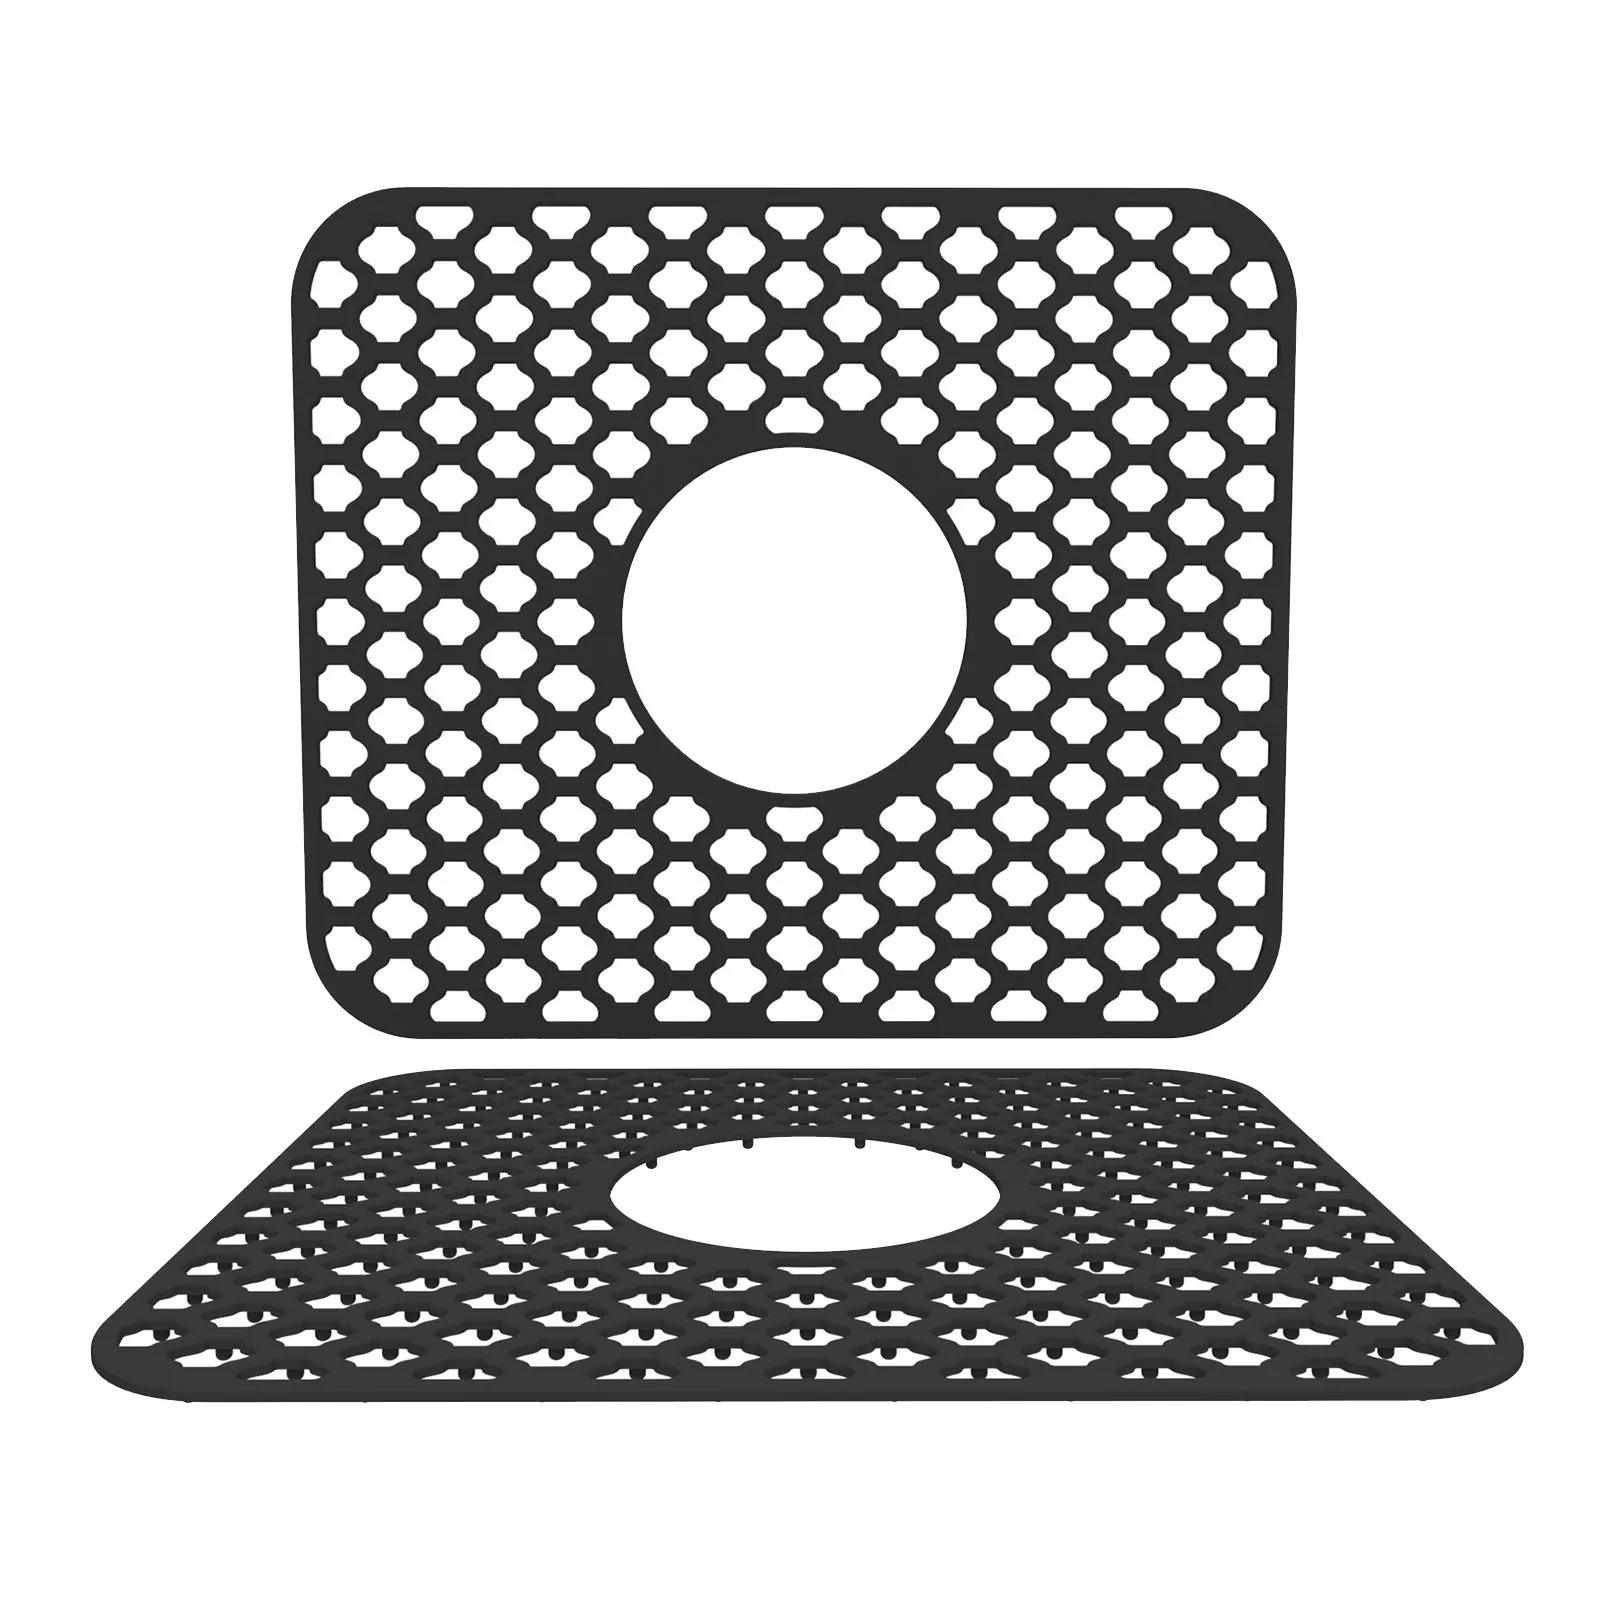 2 PCS Silicone Sink Mat for Kitchen, Folding Non-Slip Grid Sink Mats  Adjustable Sink Protectors for Bottom of Farmhouse Stainless Steel Sink